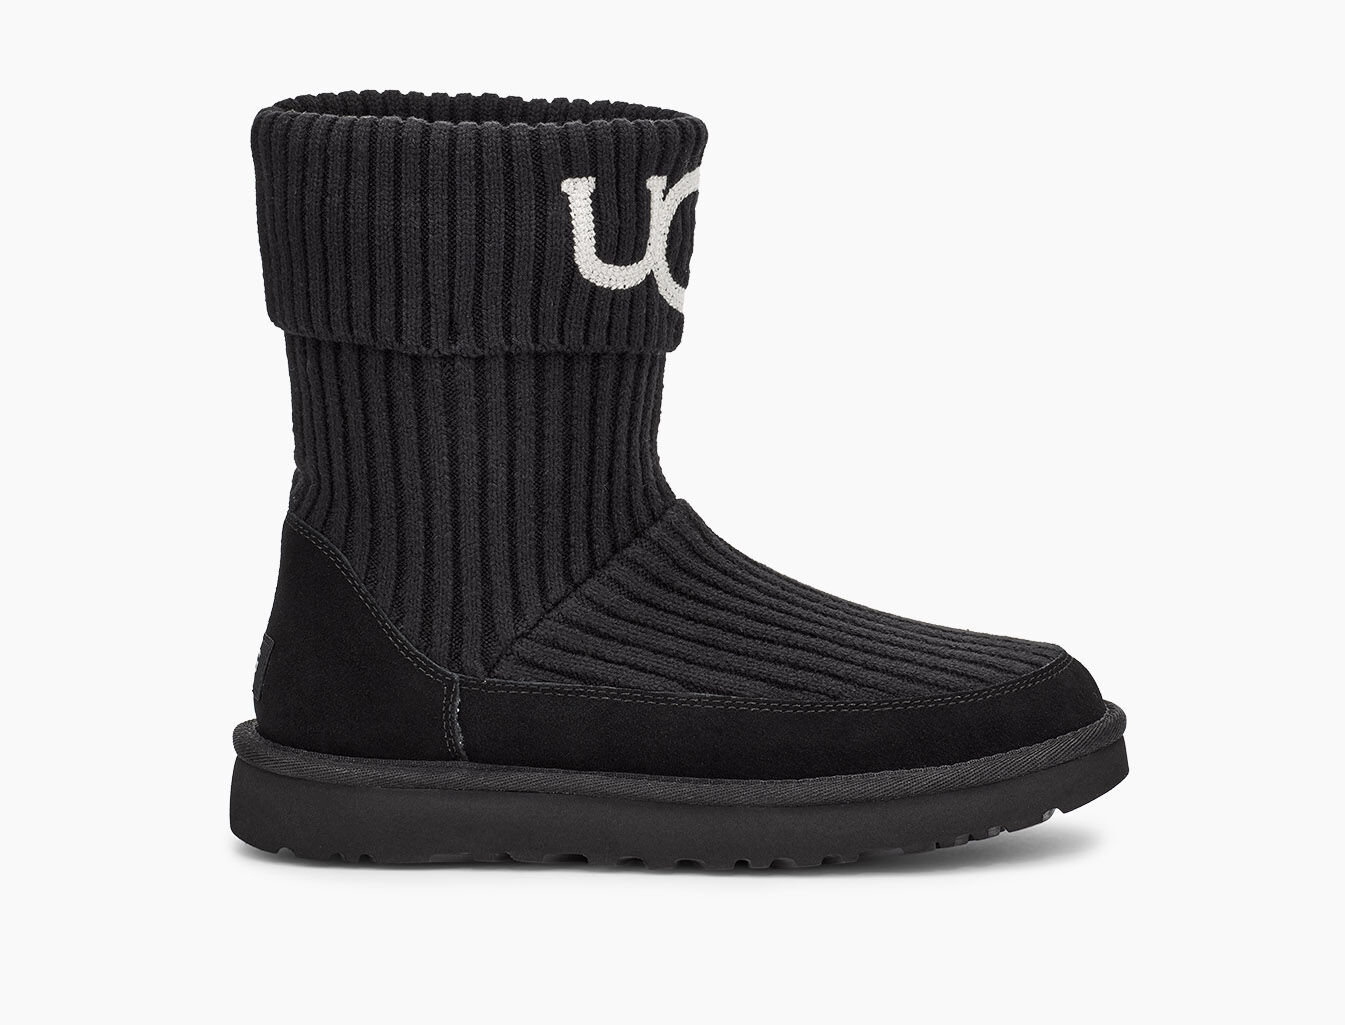 knitted ugg